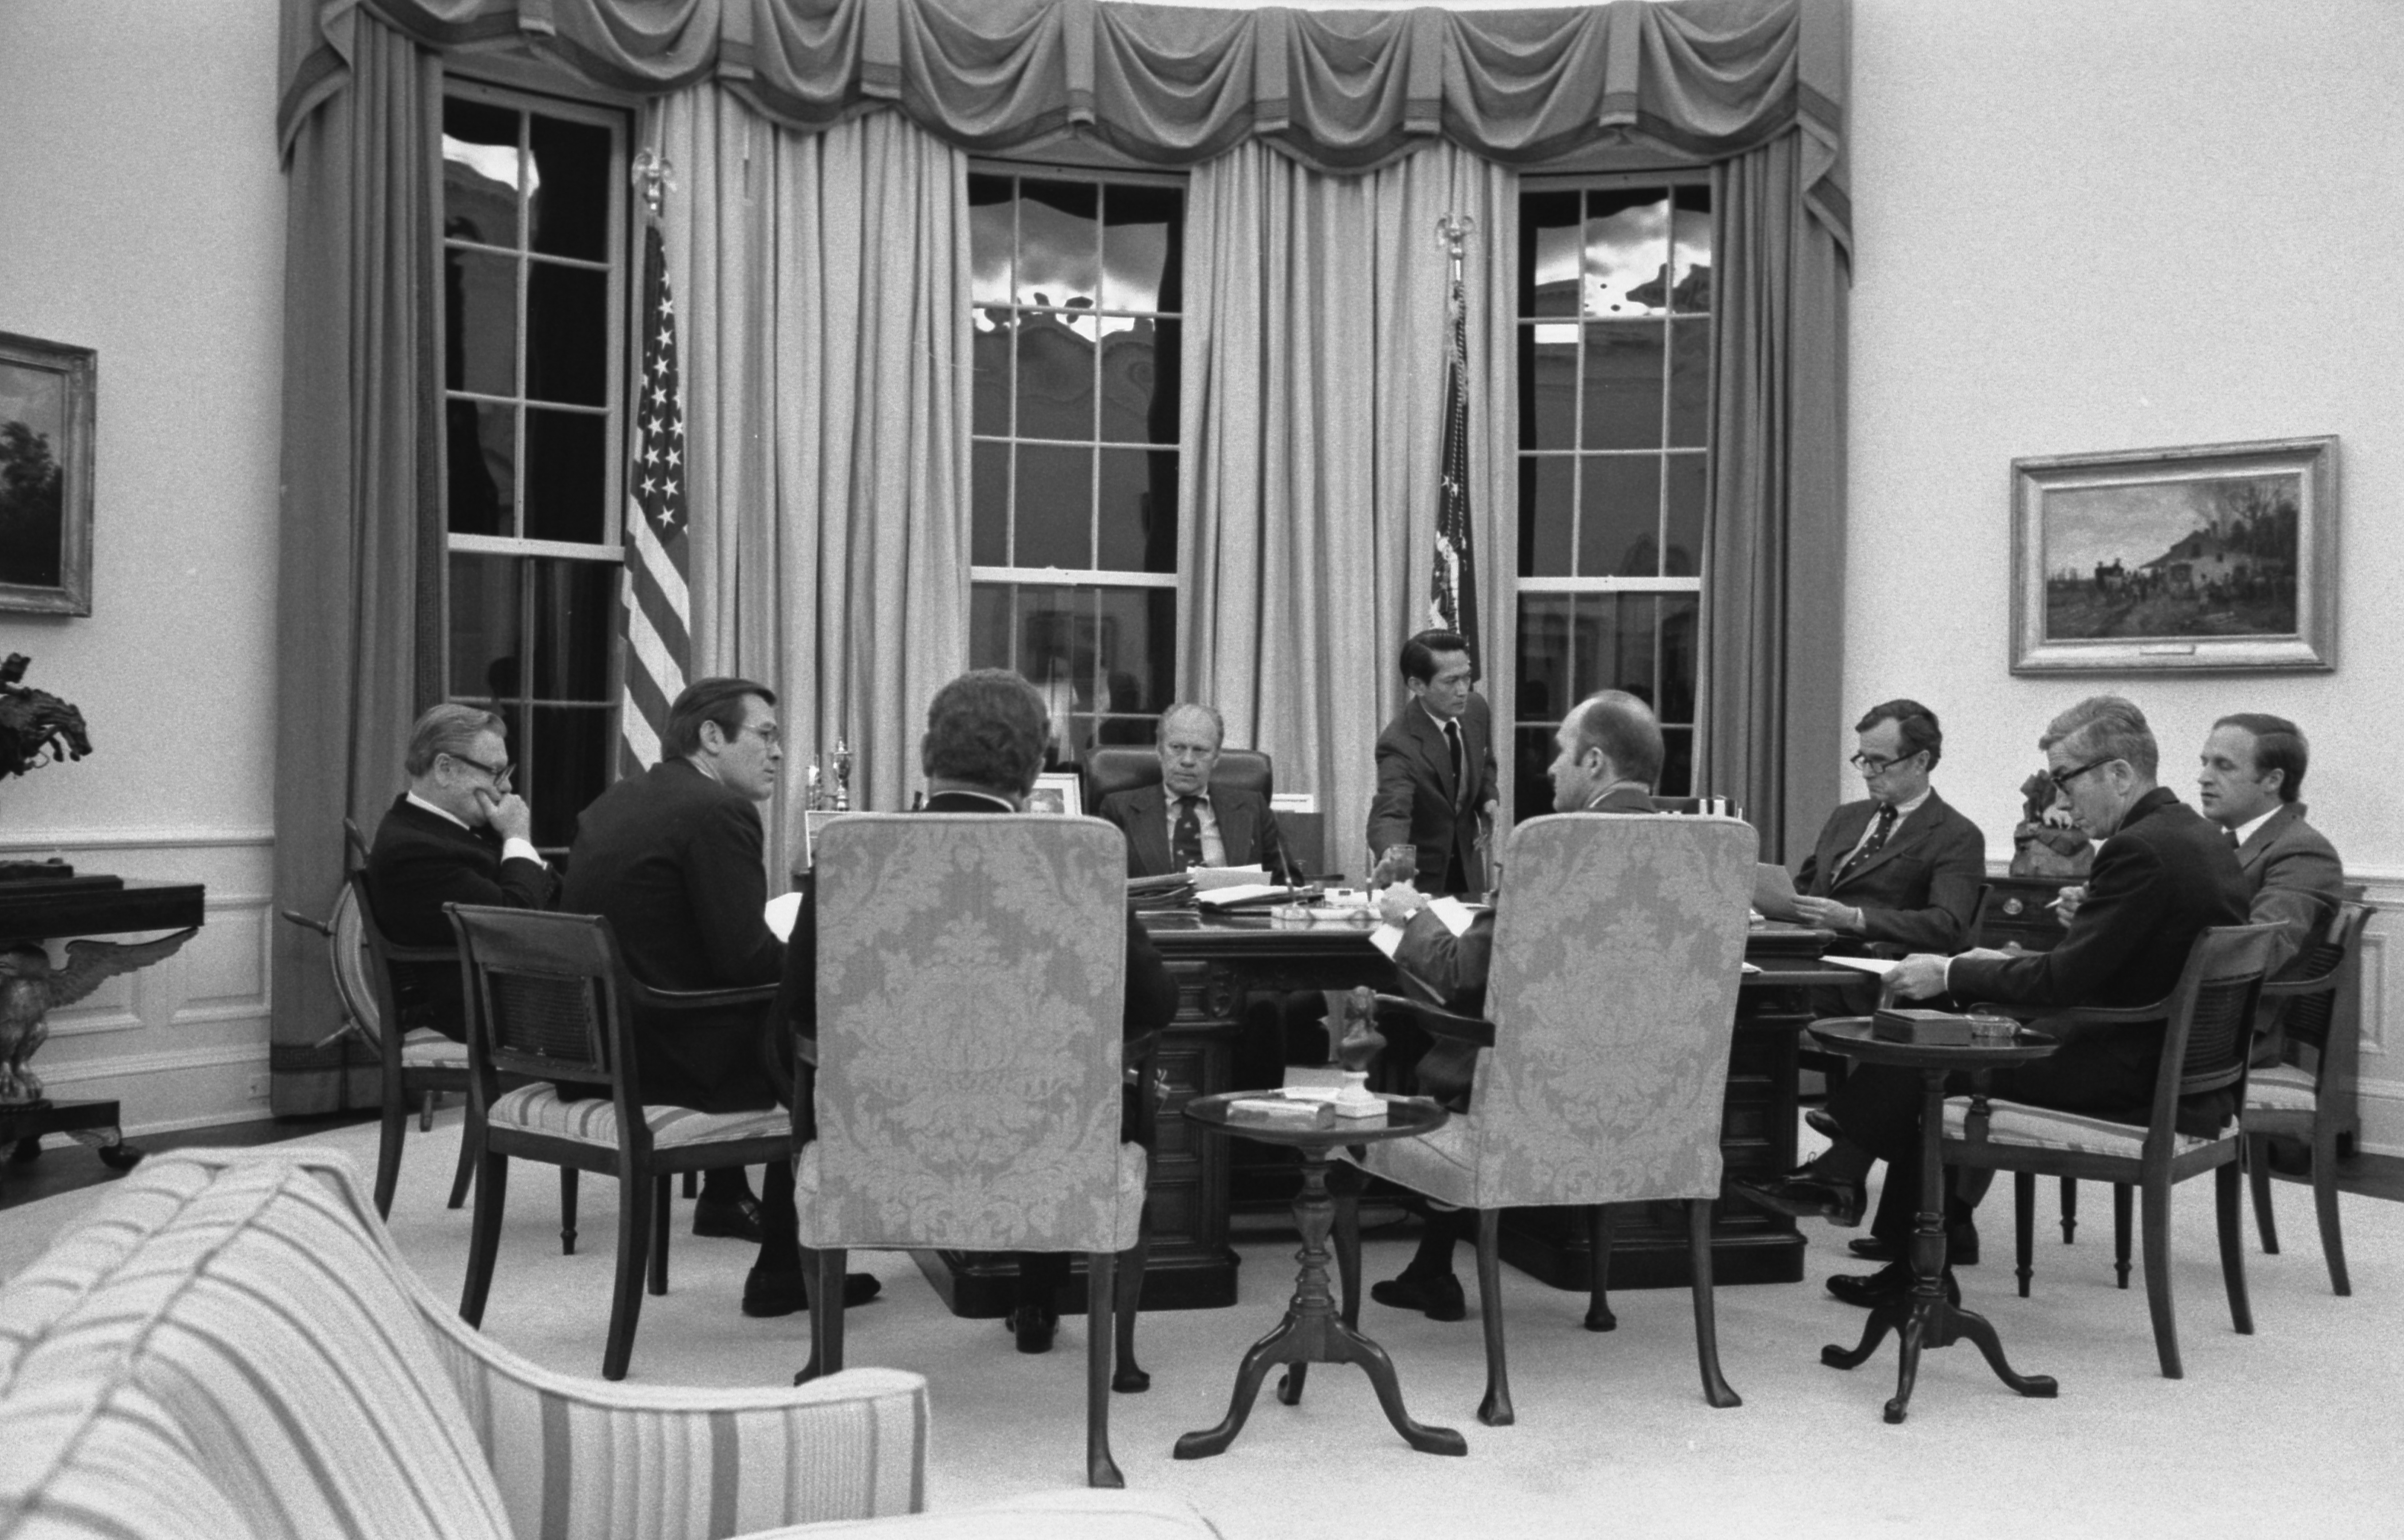 Photograph of President Gerald R. Ford Conducting a Nighttime Meeting with His Advisers to Discuss a Note Received from Soviet General Secretary Leonid Brezhnev about Strategic Arms Limitation Talks (SALT)